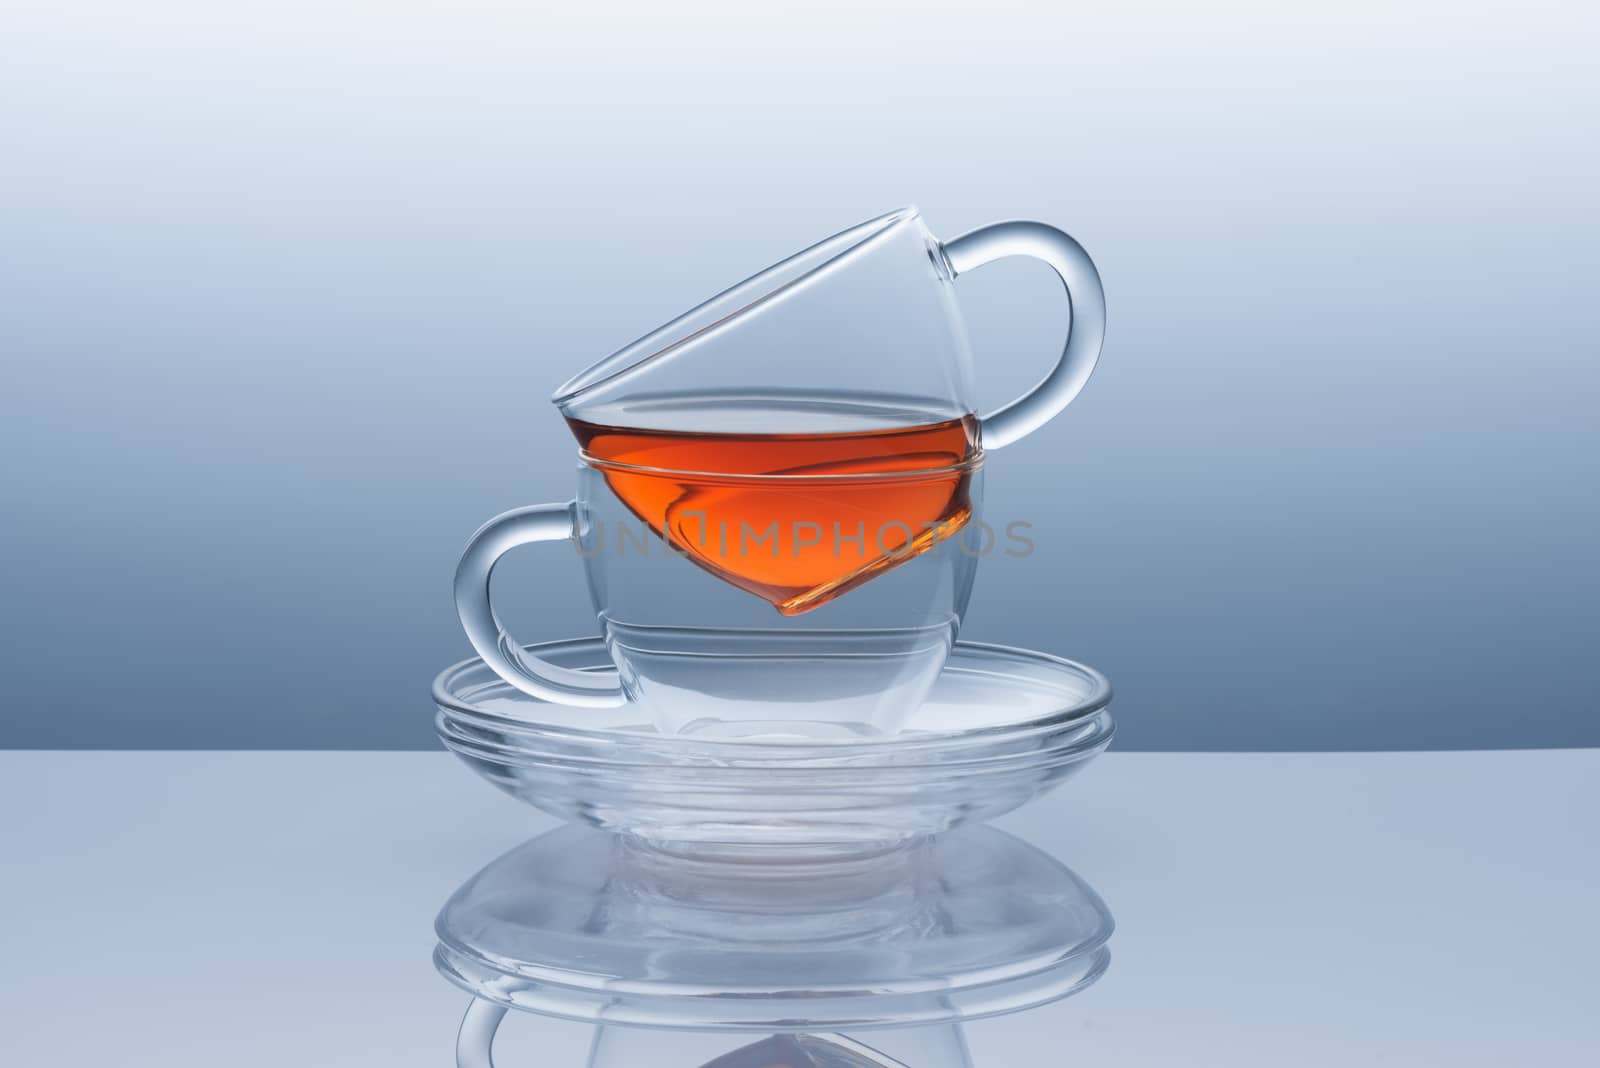 Two cups with saucers from transparent glass from the tea remains